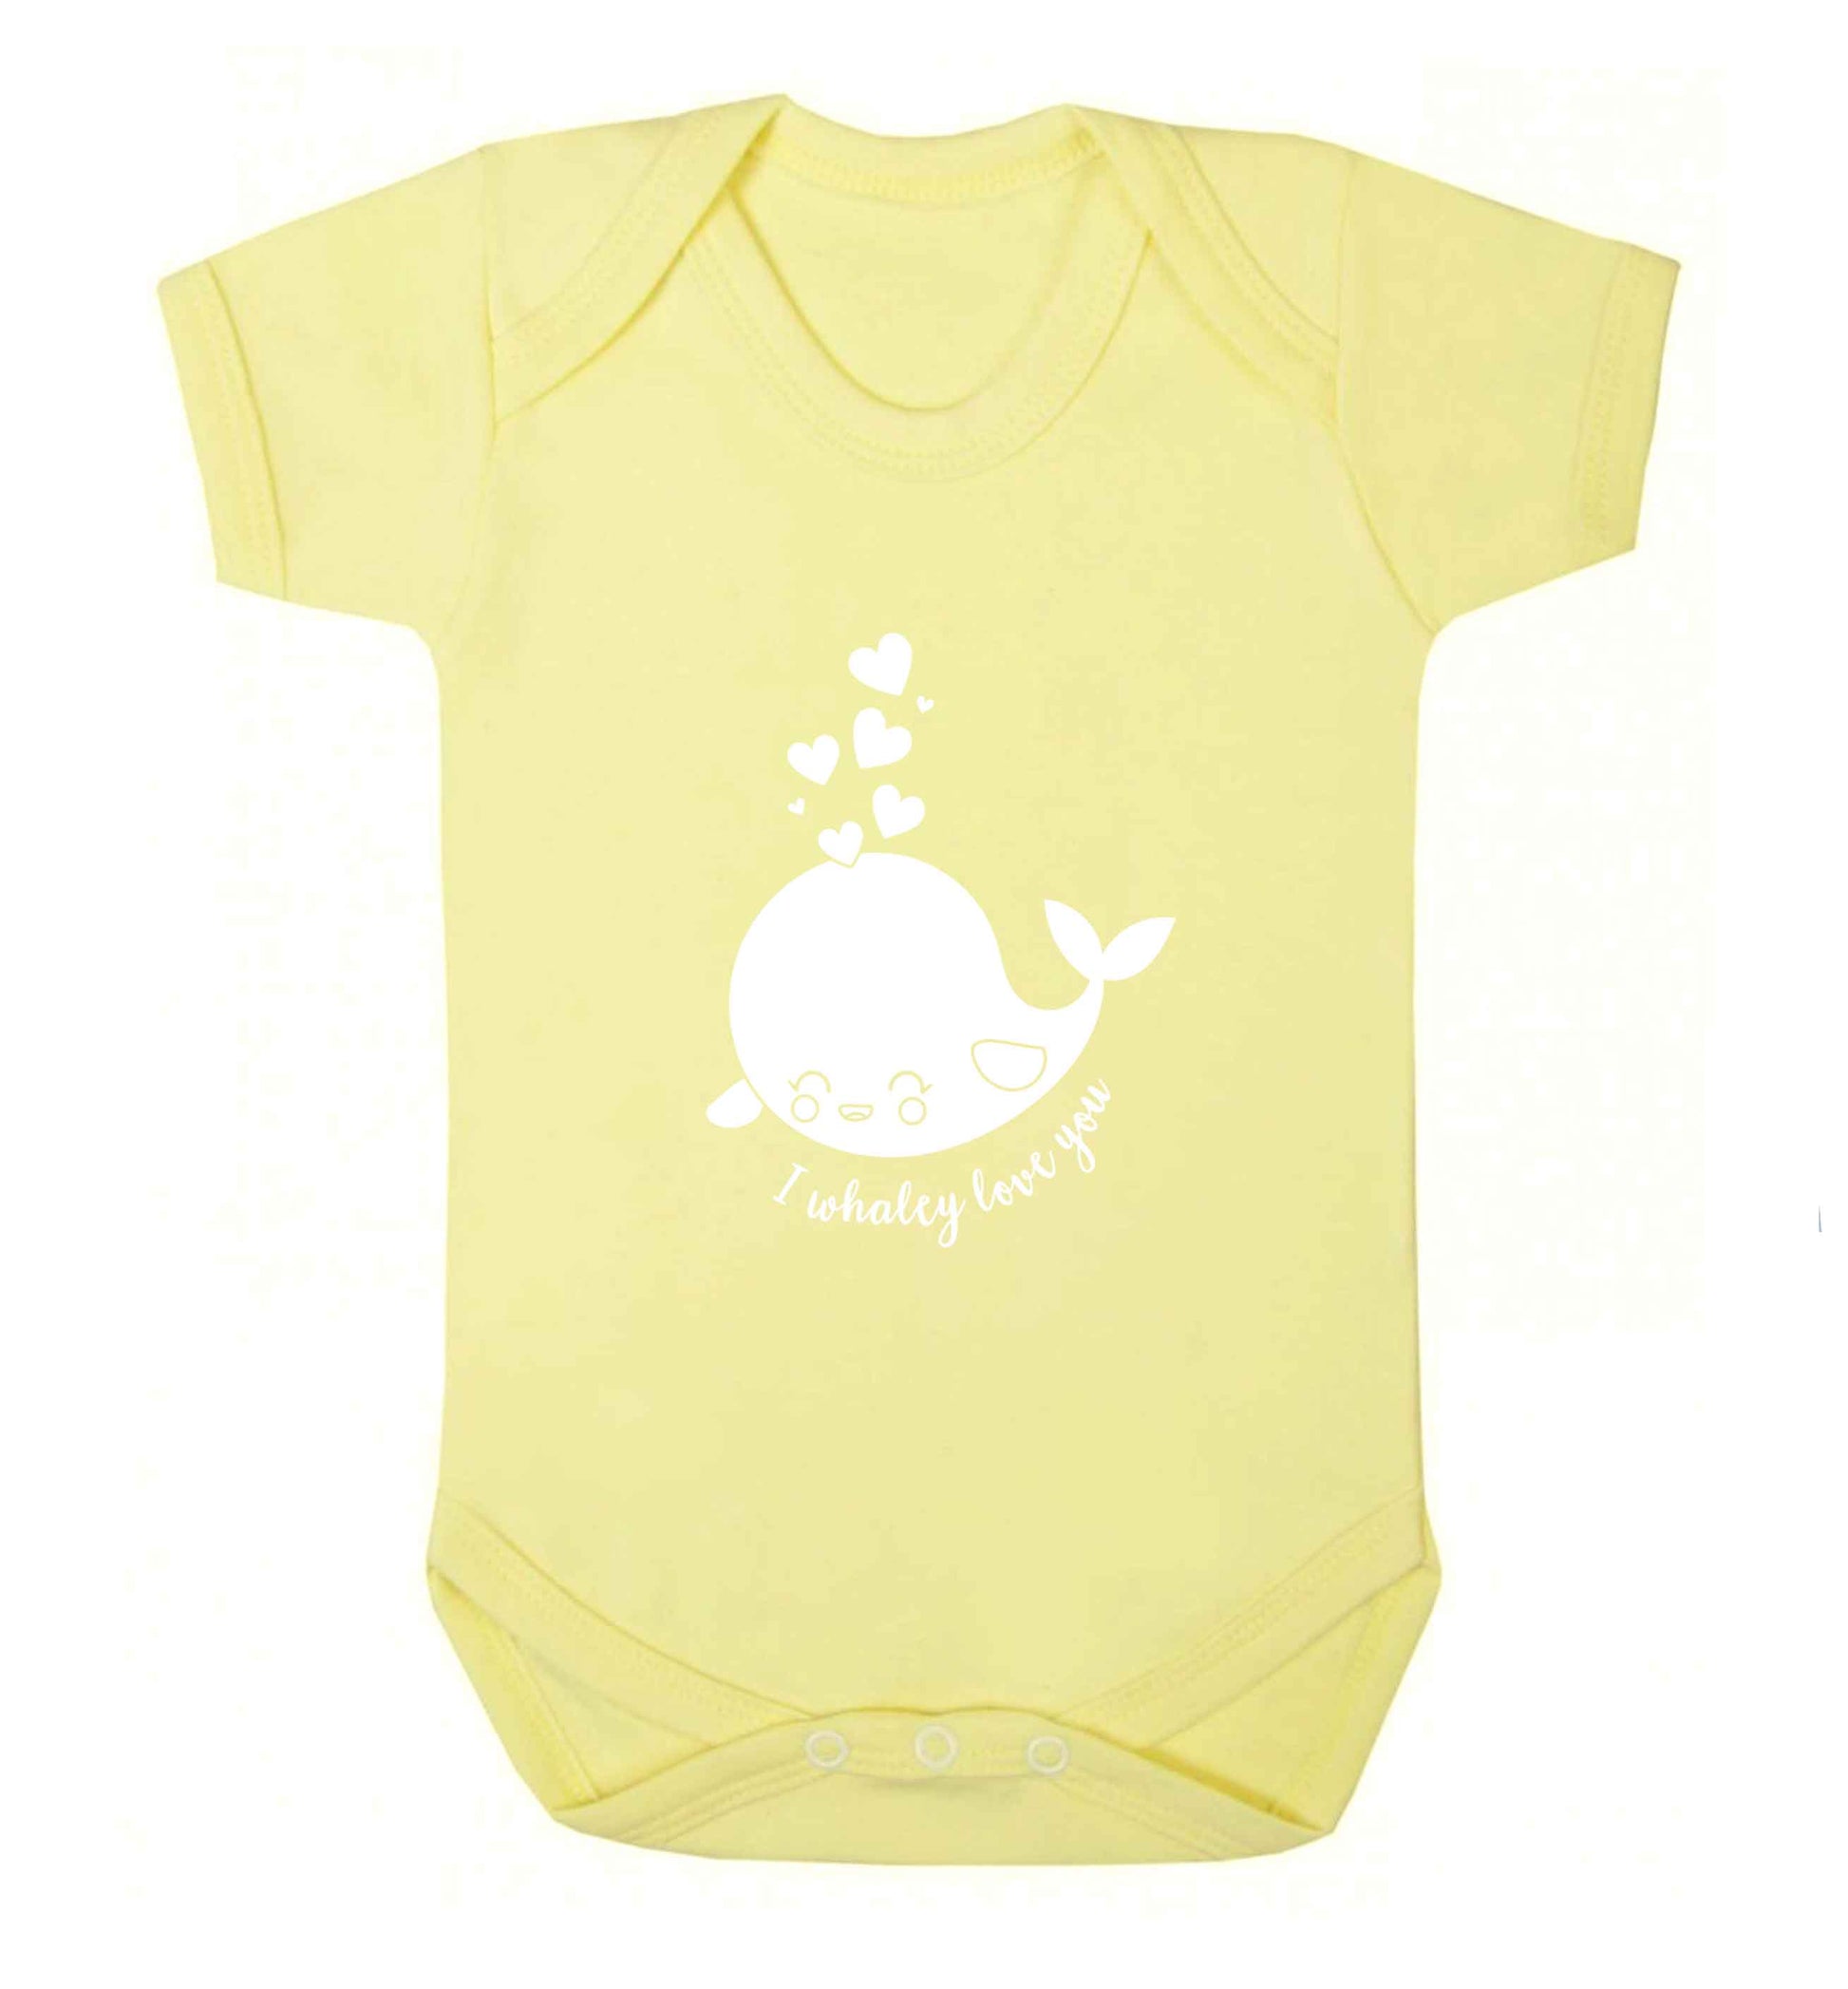 I whaley love you baby vest pale yellow 18-24 months